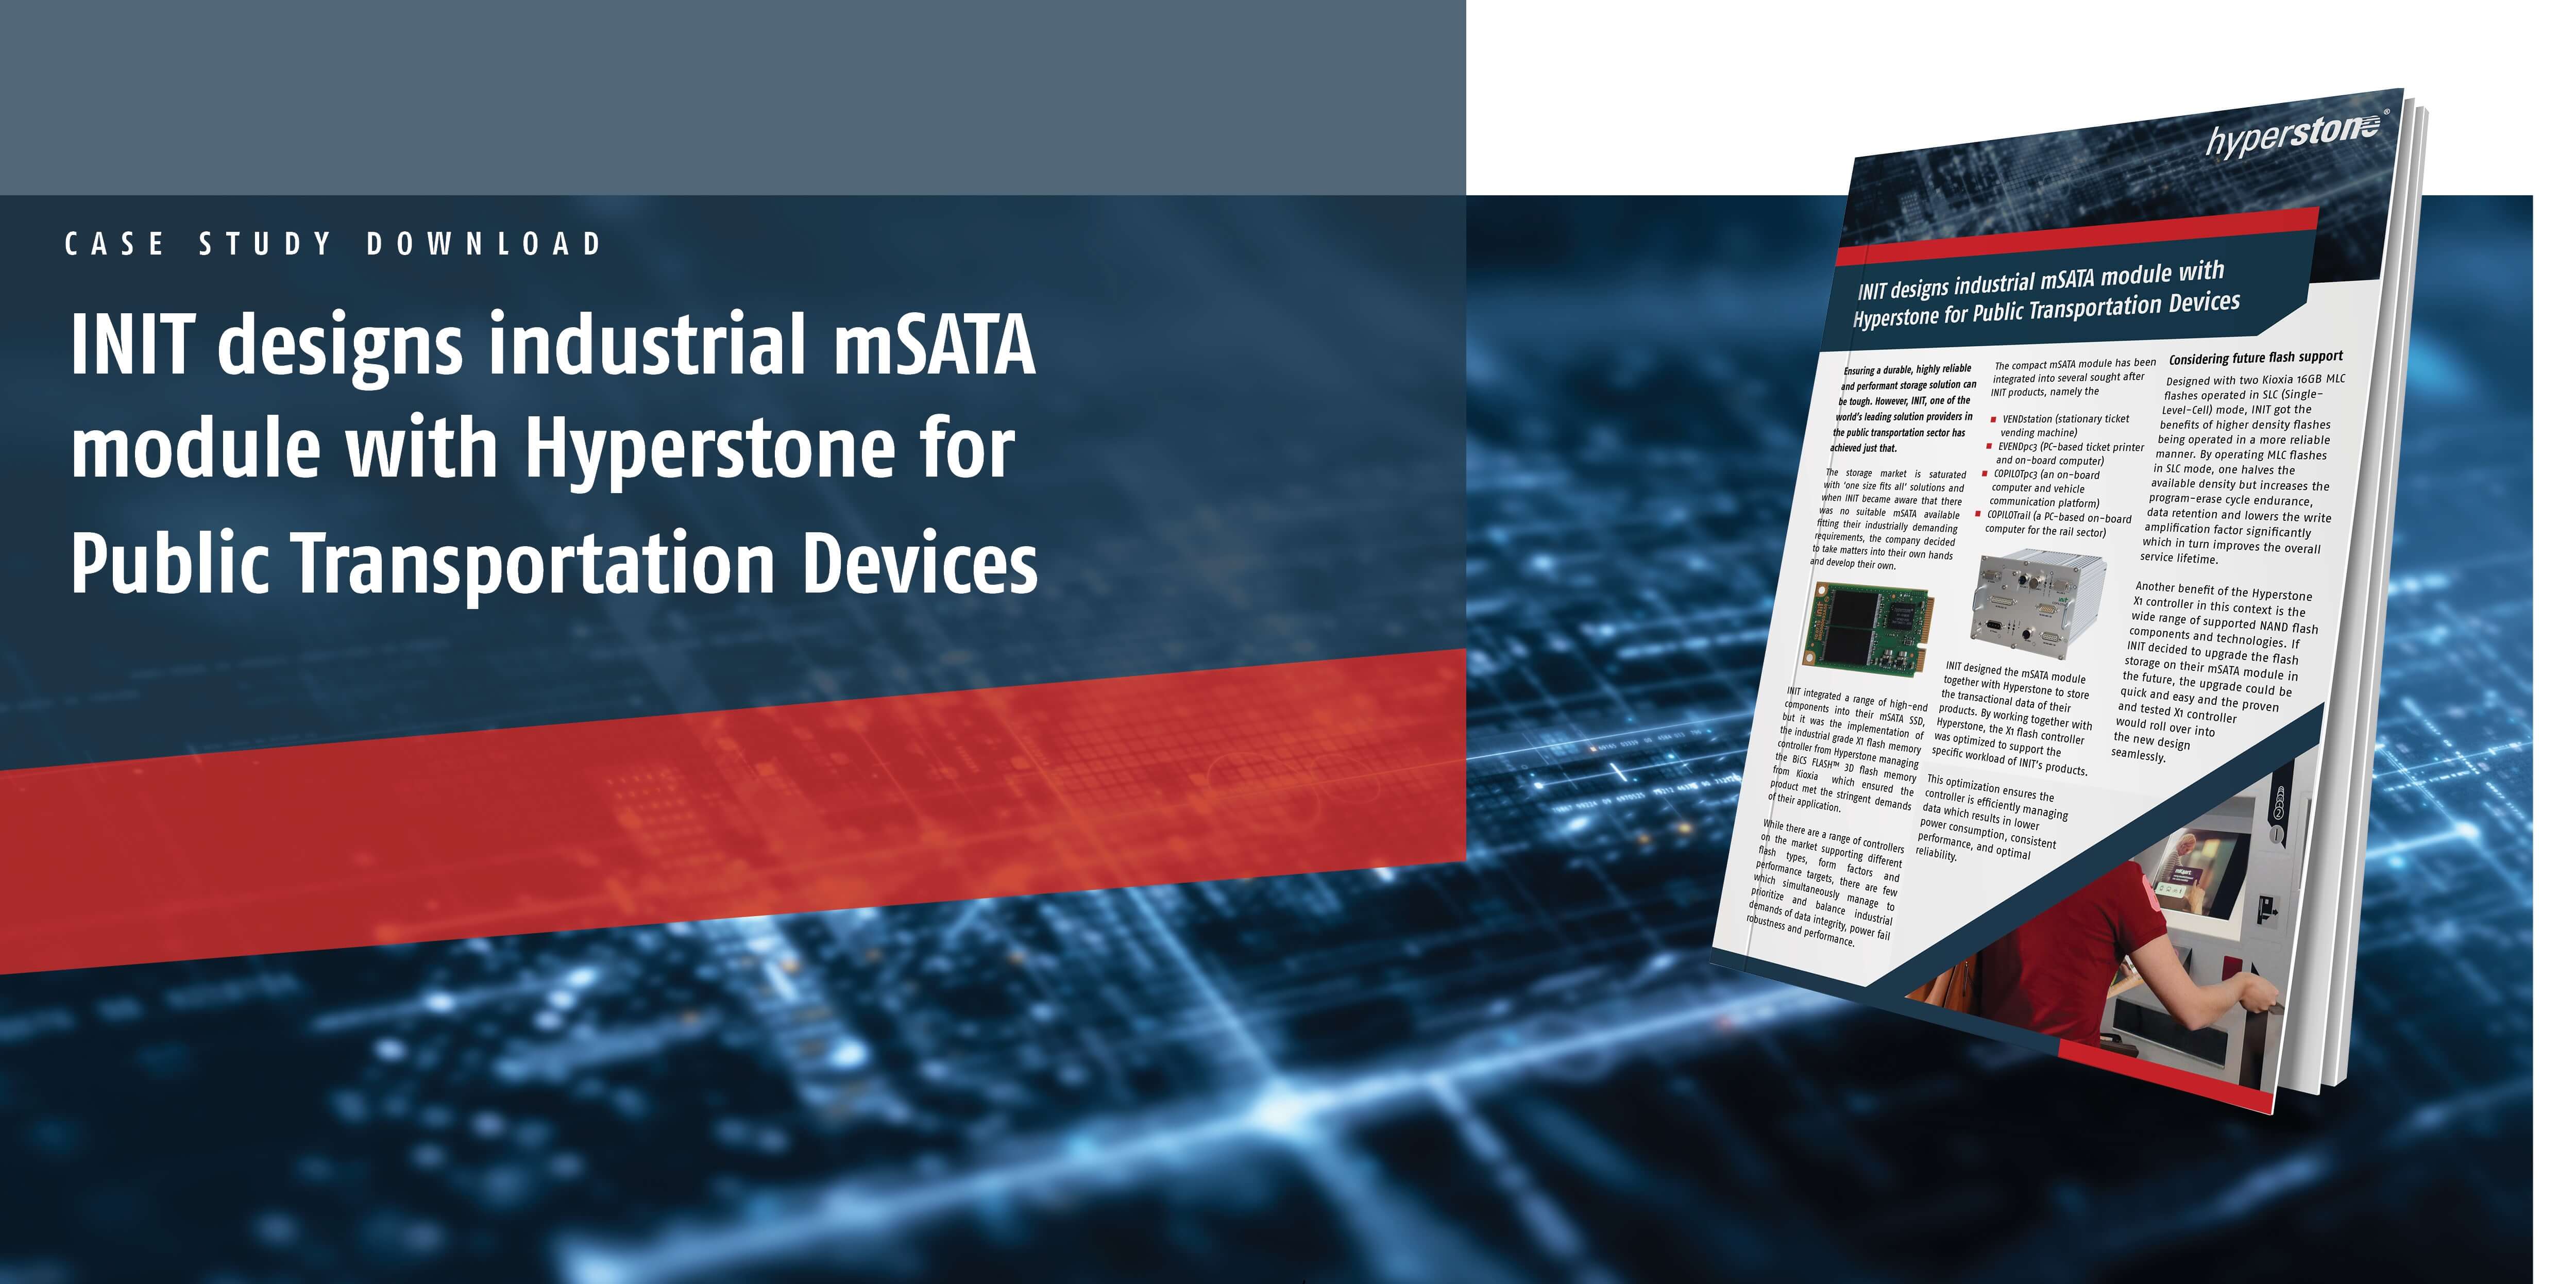 INIT designs industrial mSATA module with Hyperstone X1 for Public Transport Devices